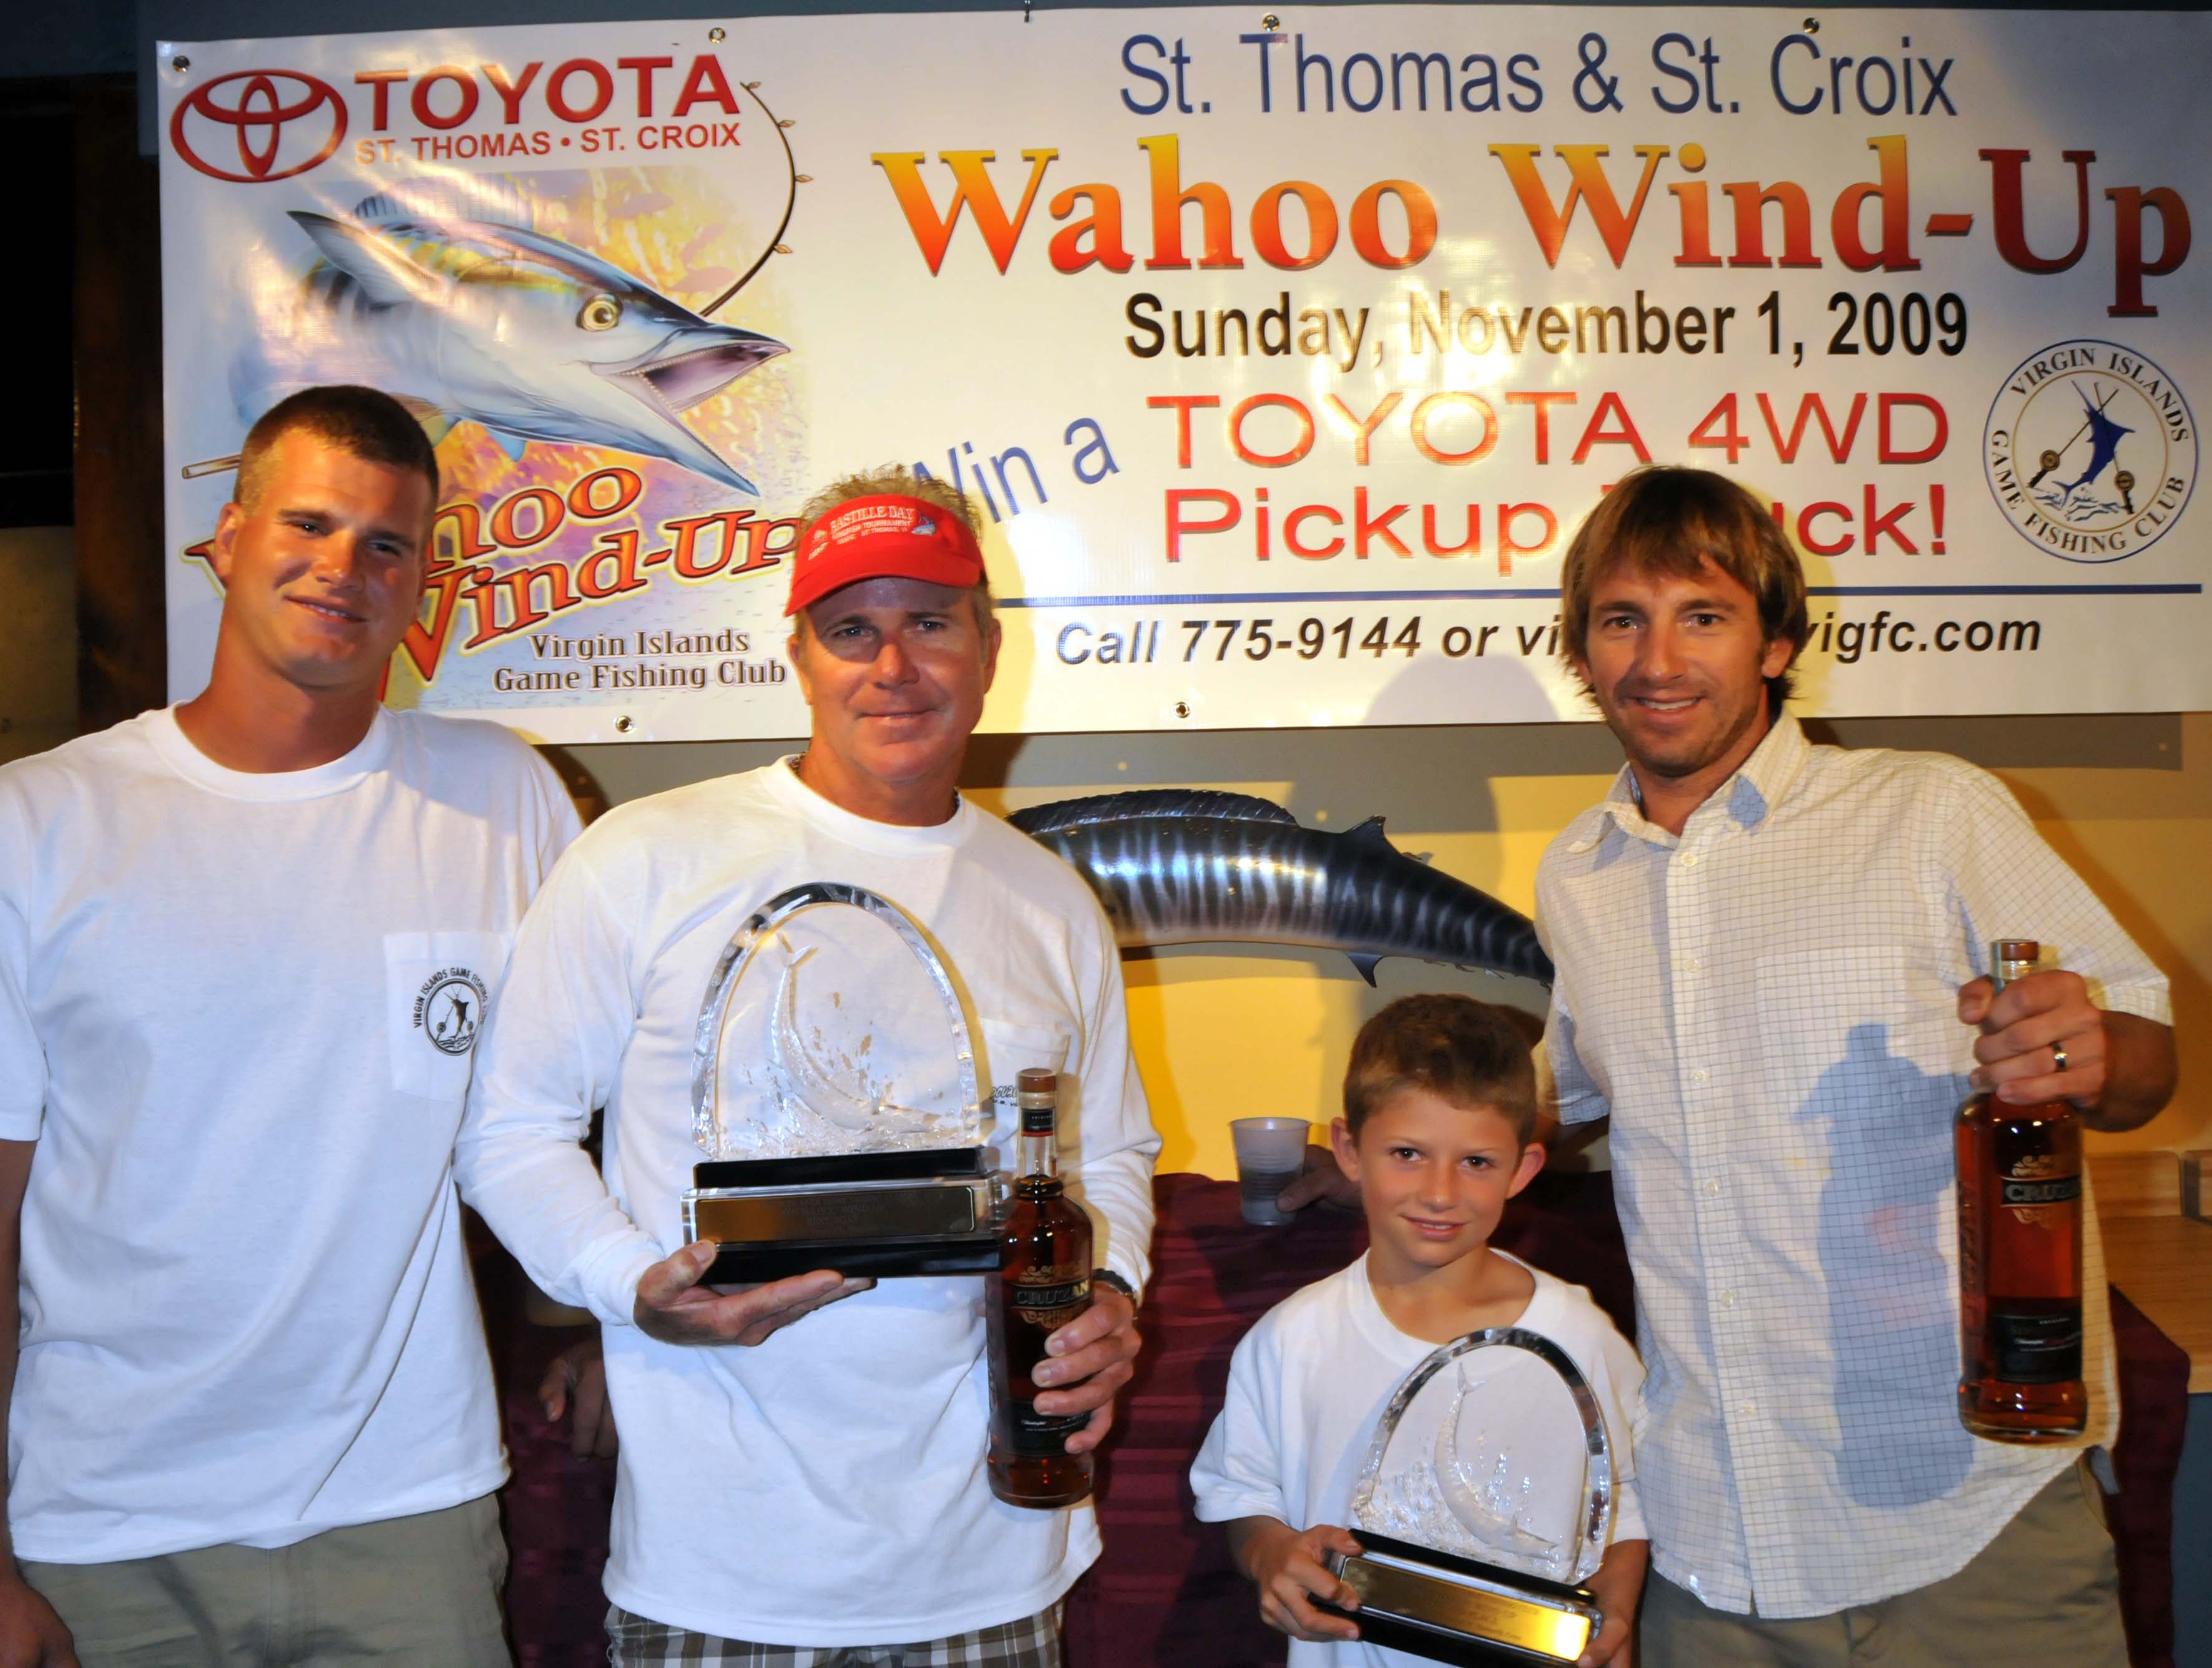 The 2009 Toyota Wahoo Wind-Up: St. Croix's Diaz Is Top Angler; St Thomas'  Gatcliffe Is Second Top Angler – VI Source Network